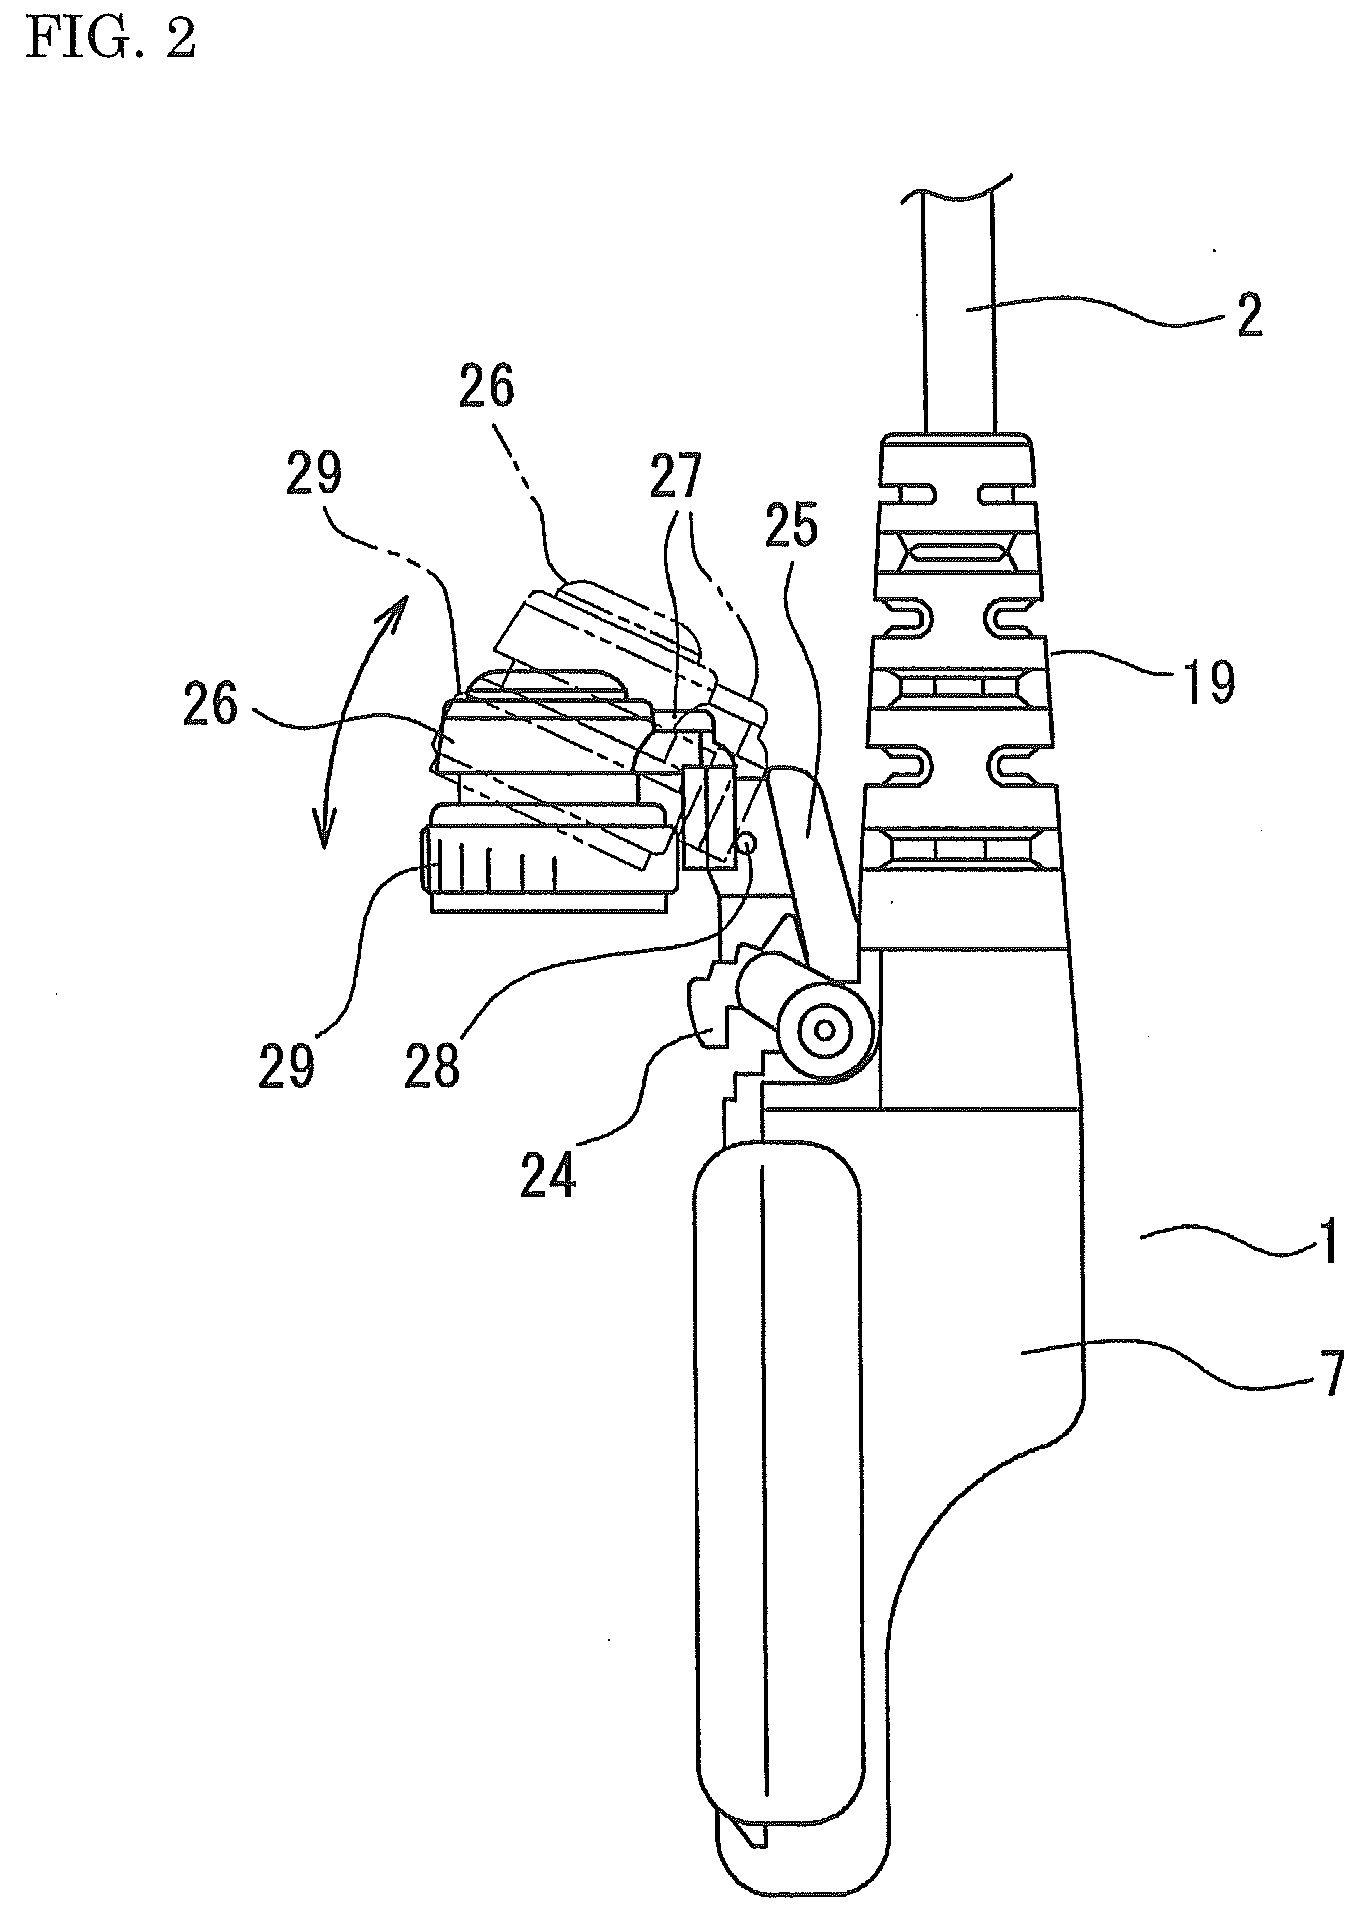 Connector for connecting cable of hand microphone with antenna to portable radio machine body